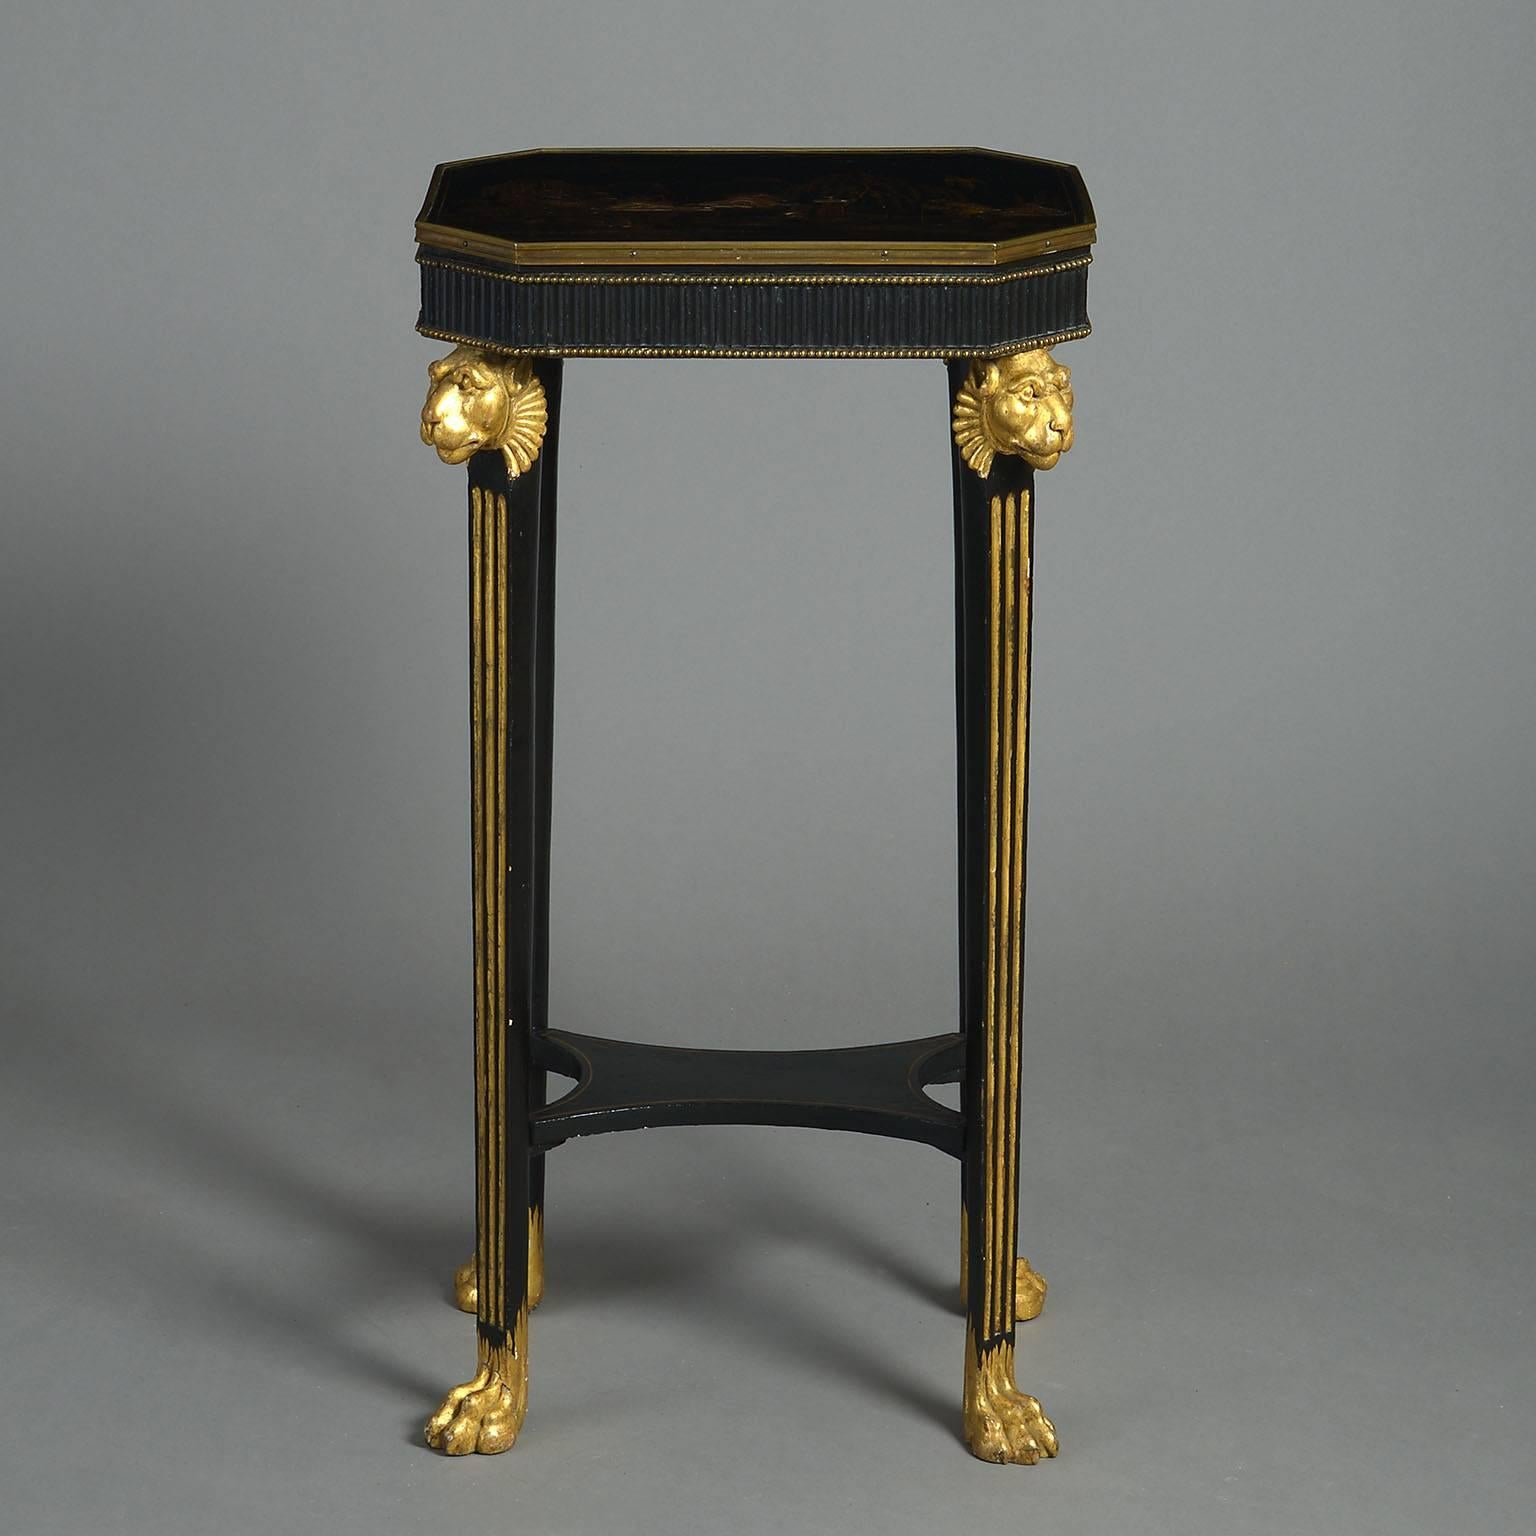 English Regency Leopard Head Lacquered Stand by Thomas Hope